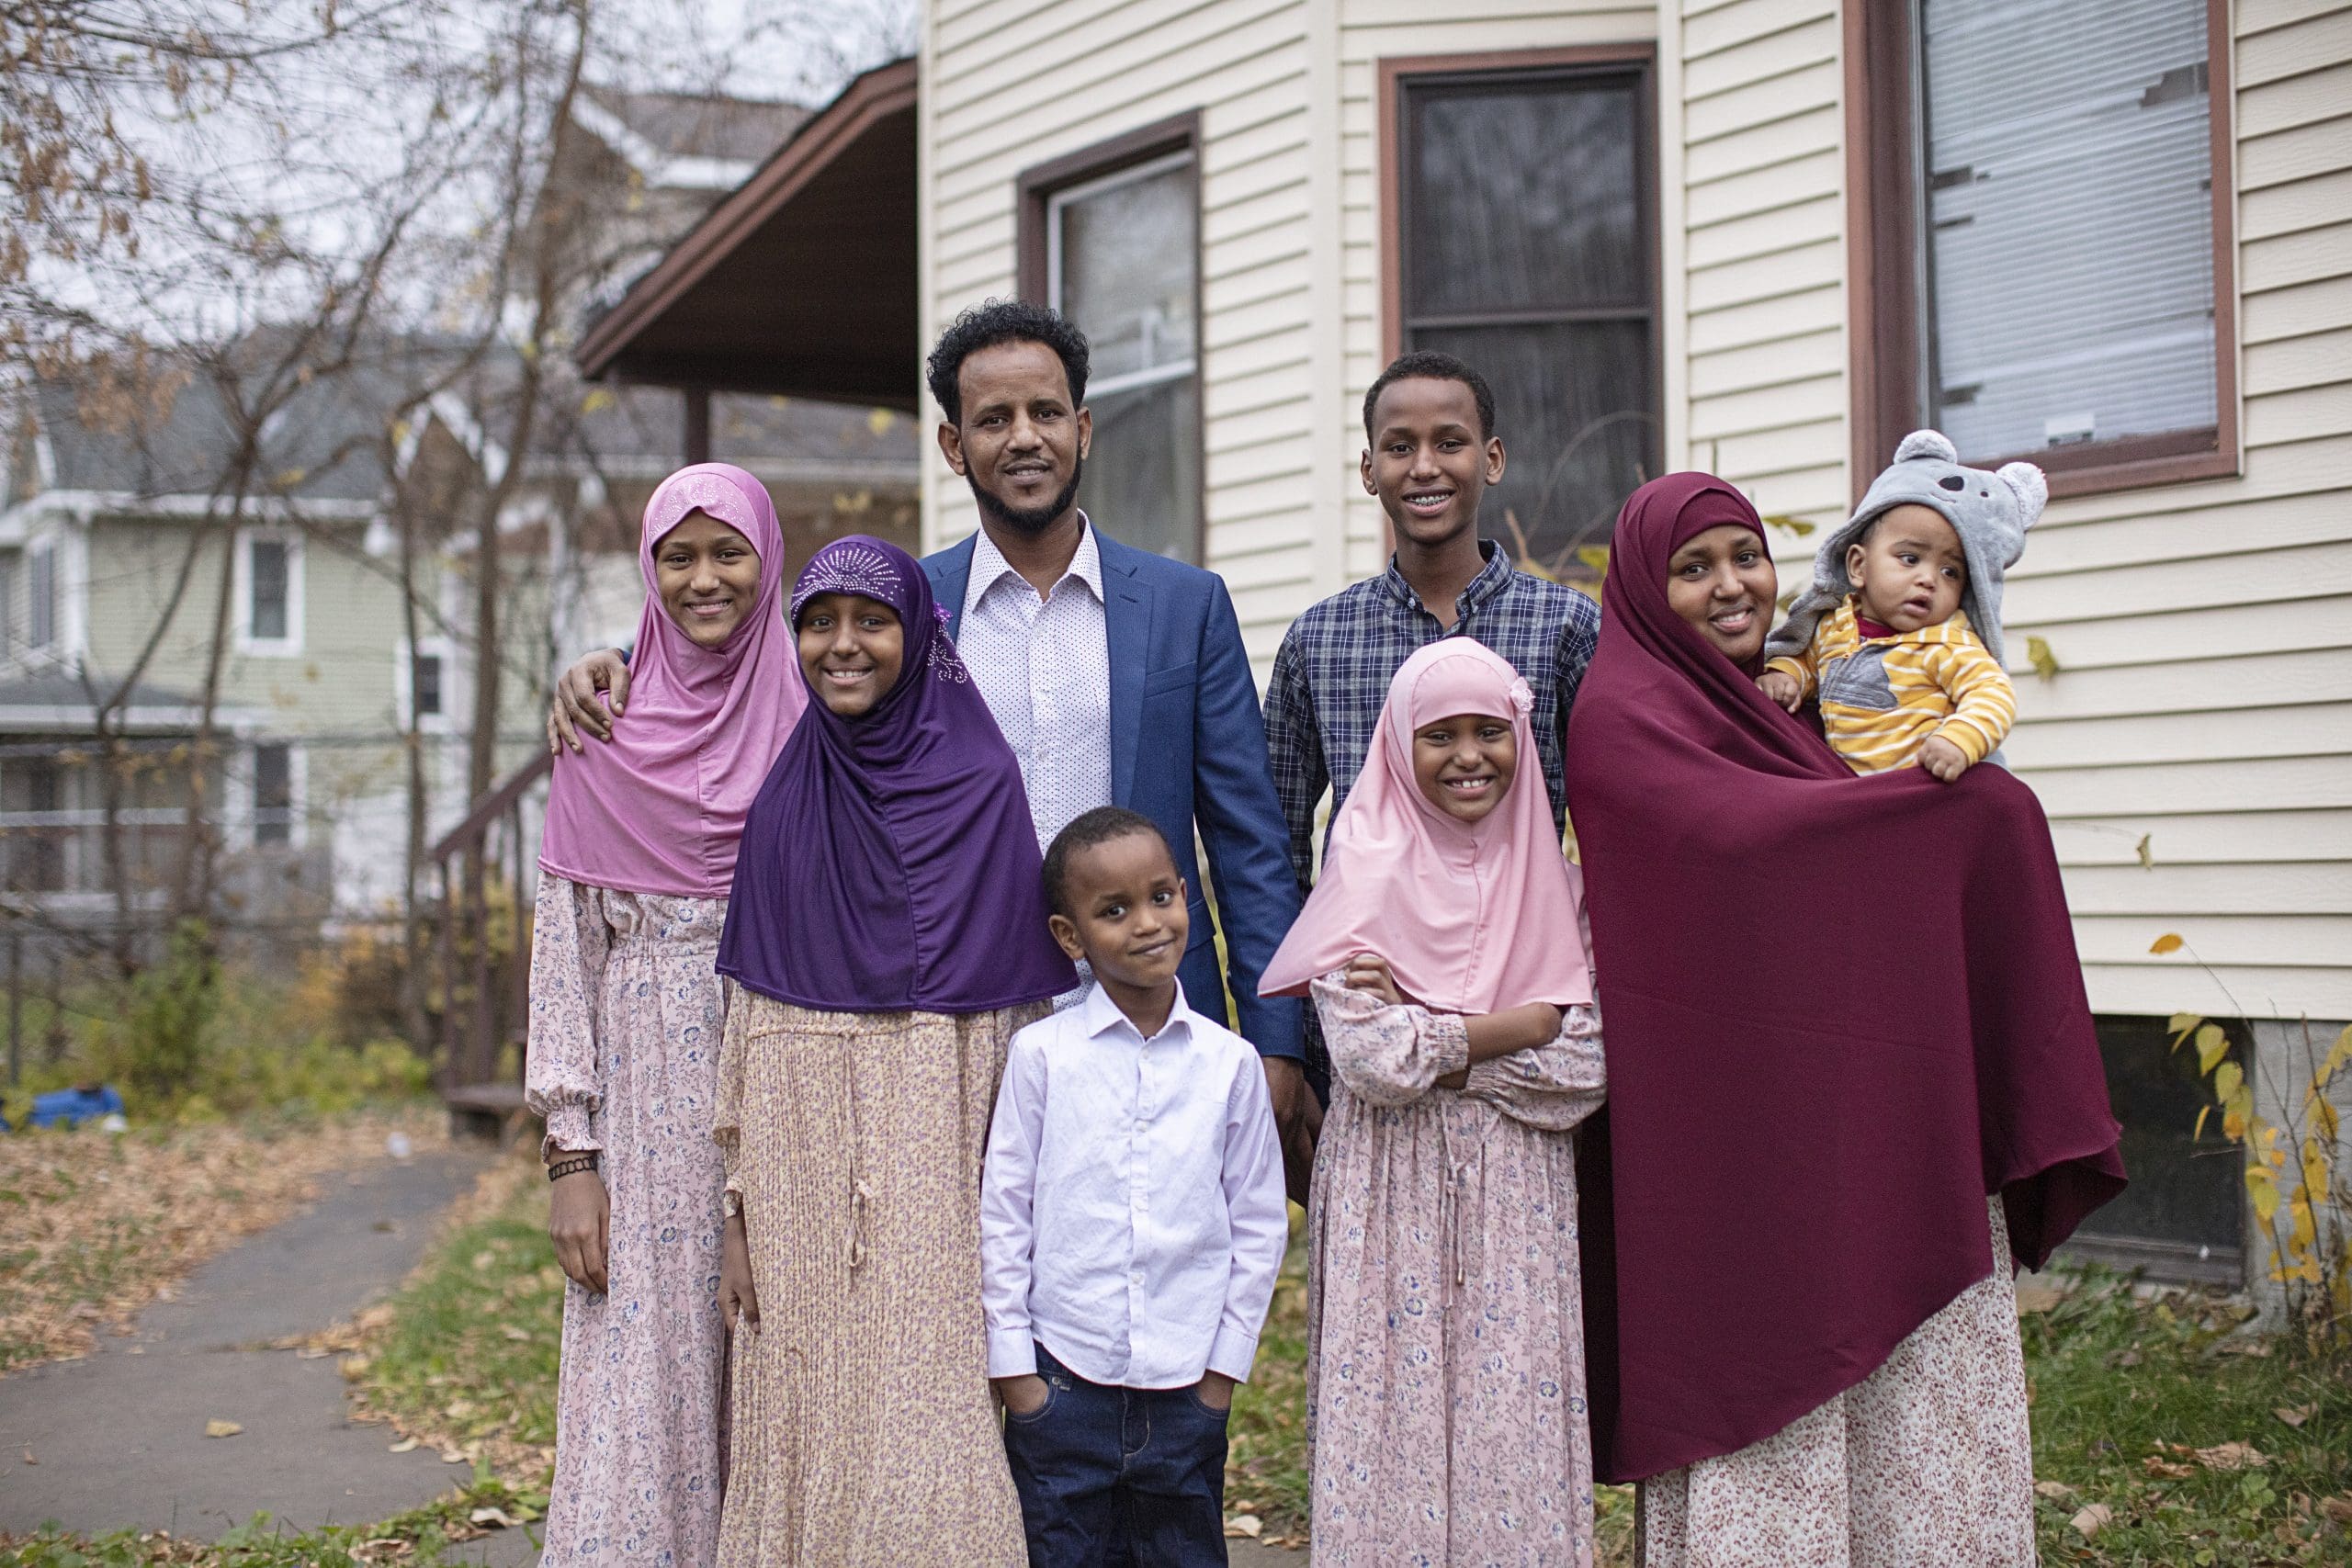 A reunited family of New Americans poses outside their home.